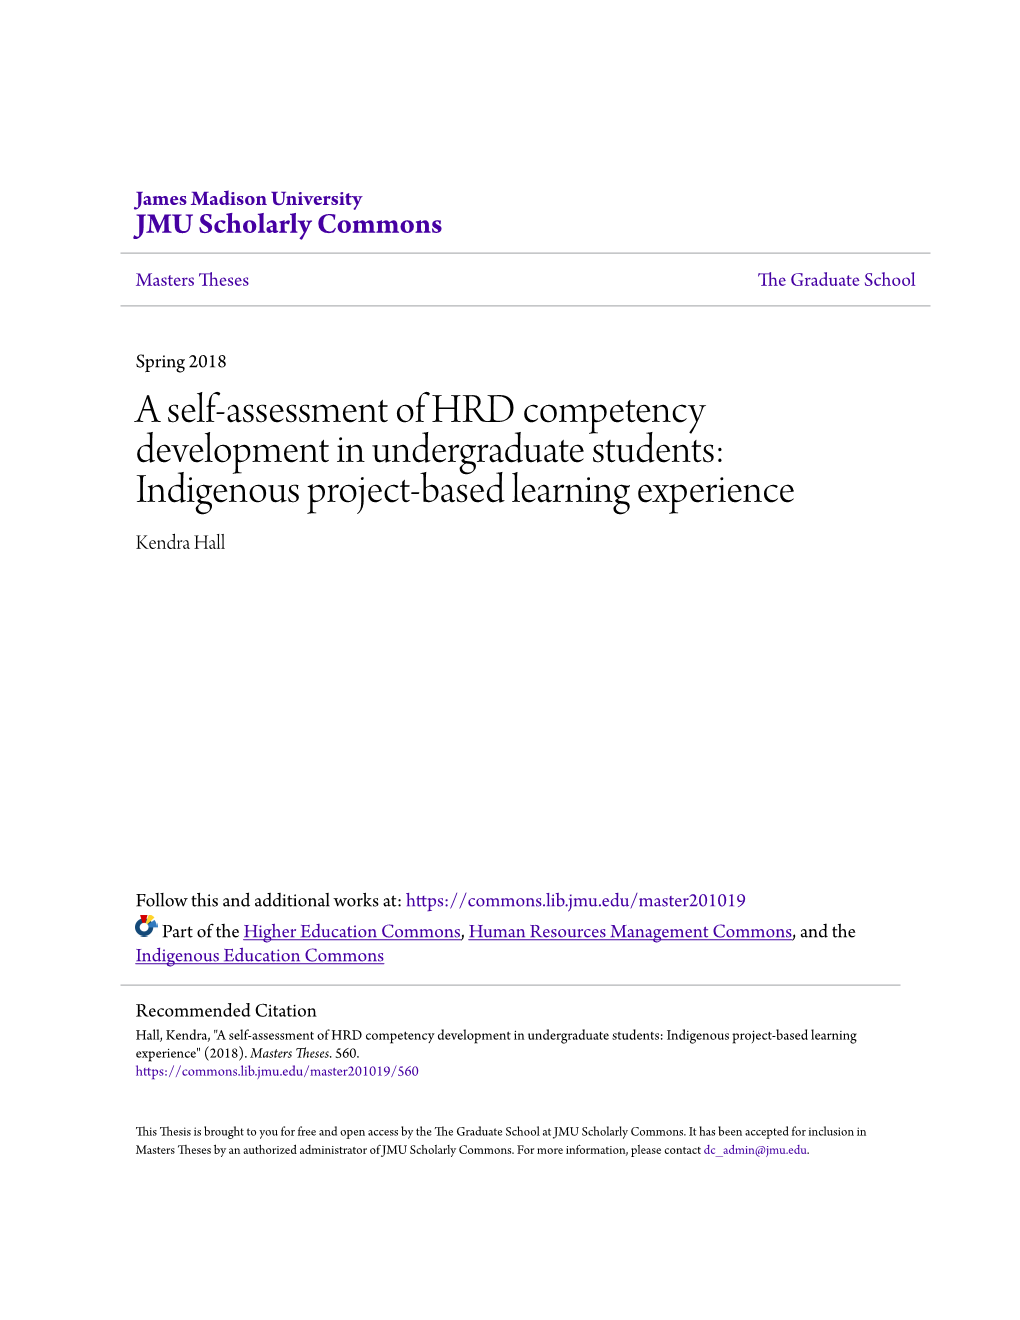 A Self-Assessment of HRD Competency Development in Undergraduate Students: Indigenous Project-Based Learning Experience Kendra Hall